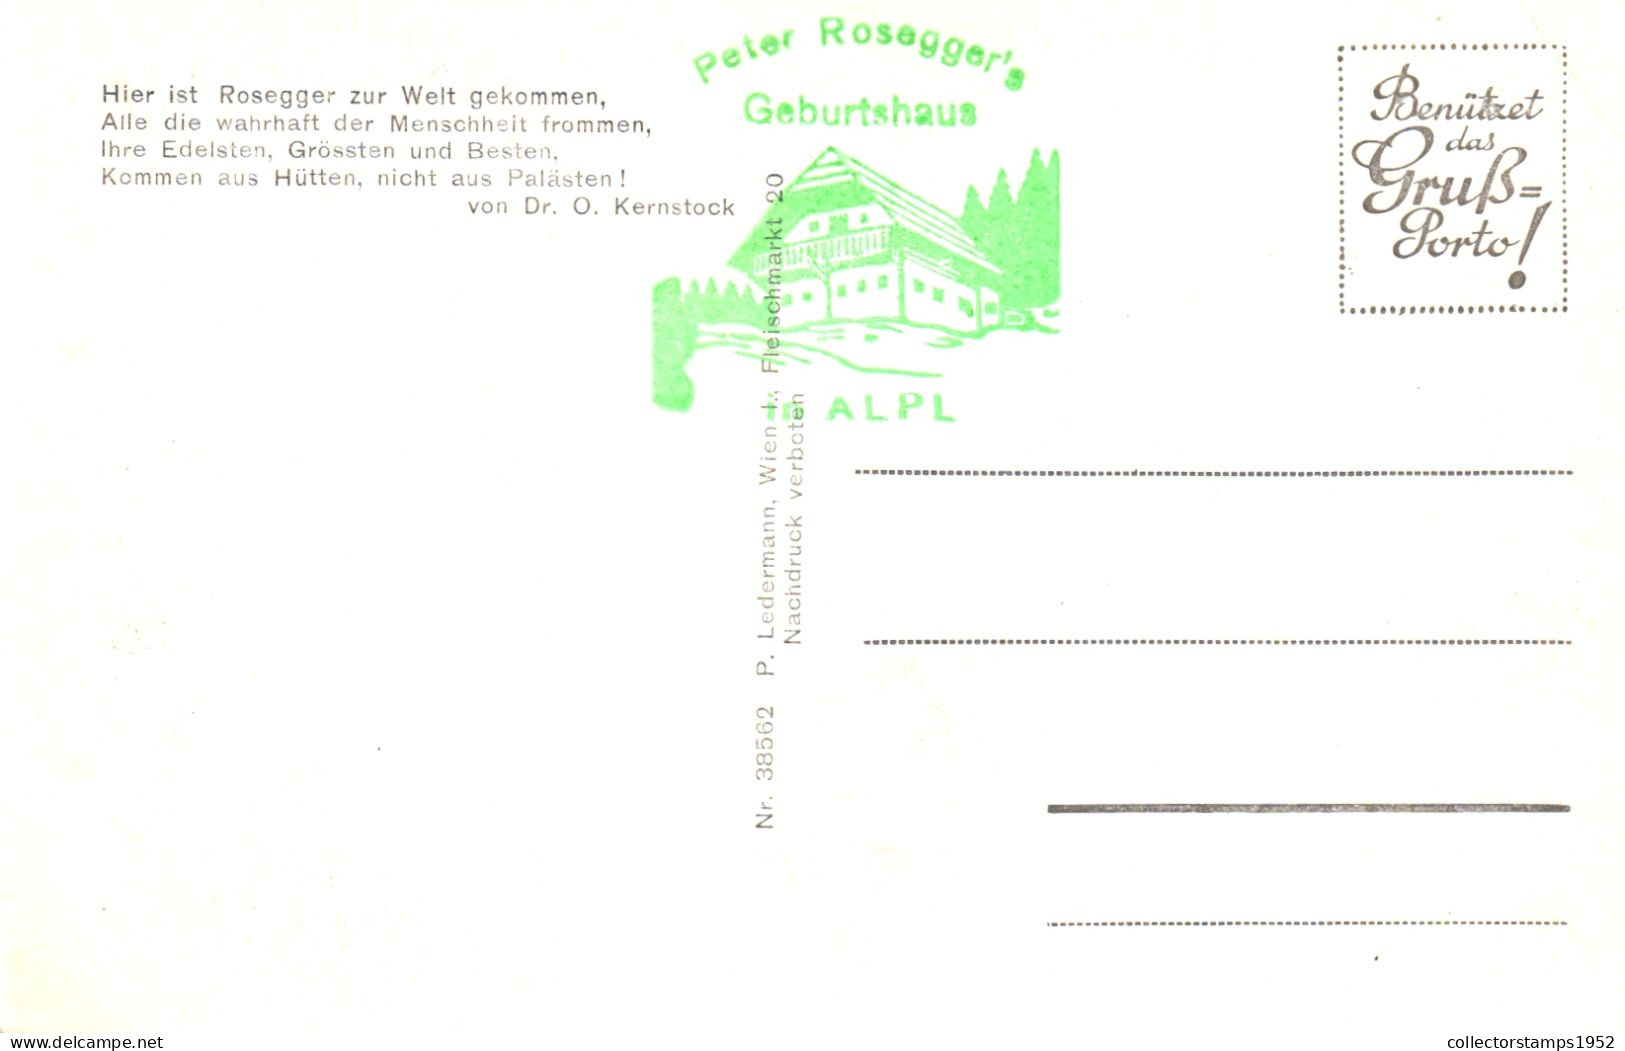 KRIEGLACH, STYRIA, PETER ROSEGGER'S BIRTHPLACE, ARCHITECTURE, GERMANY, POSTCARD - Krieglach